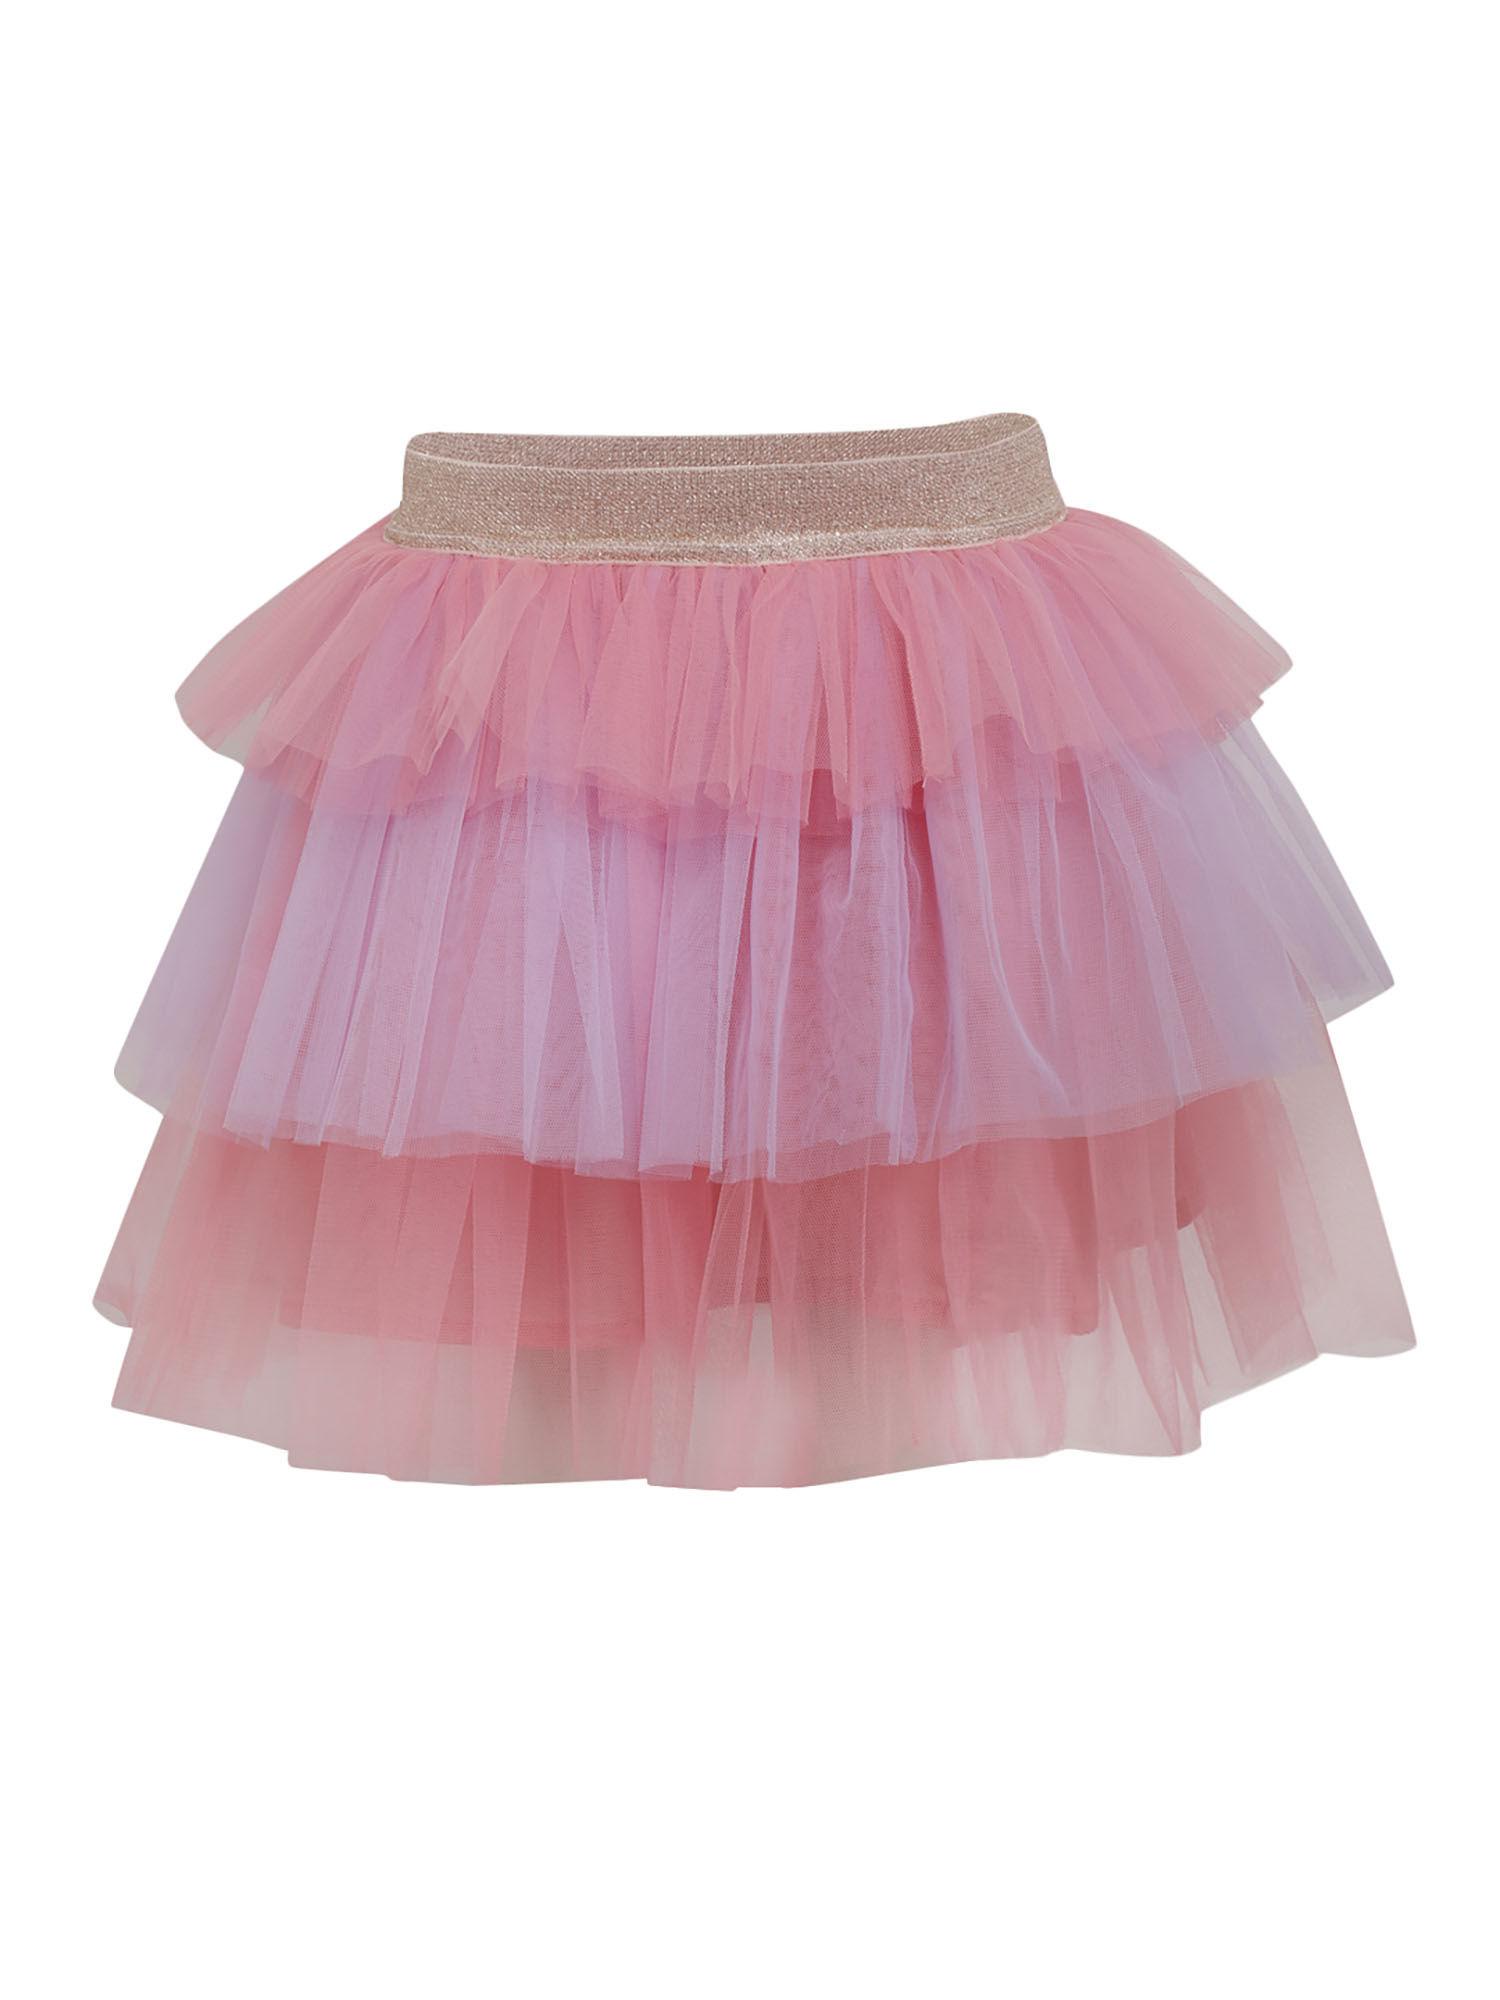 multi-color-tier-tulle-skirt